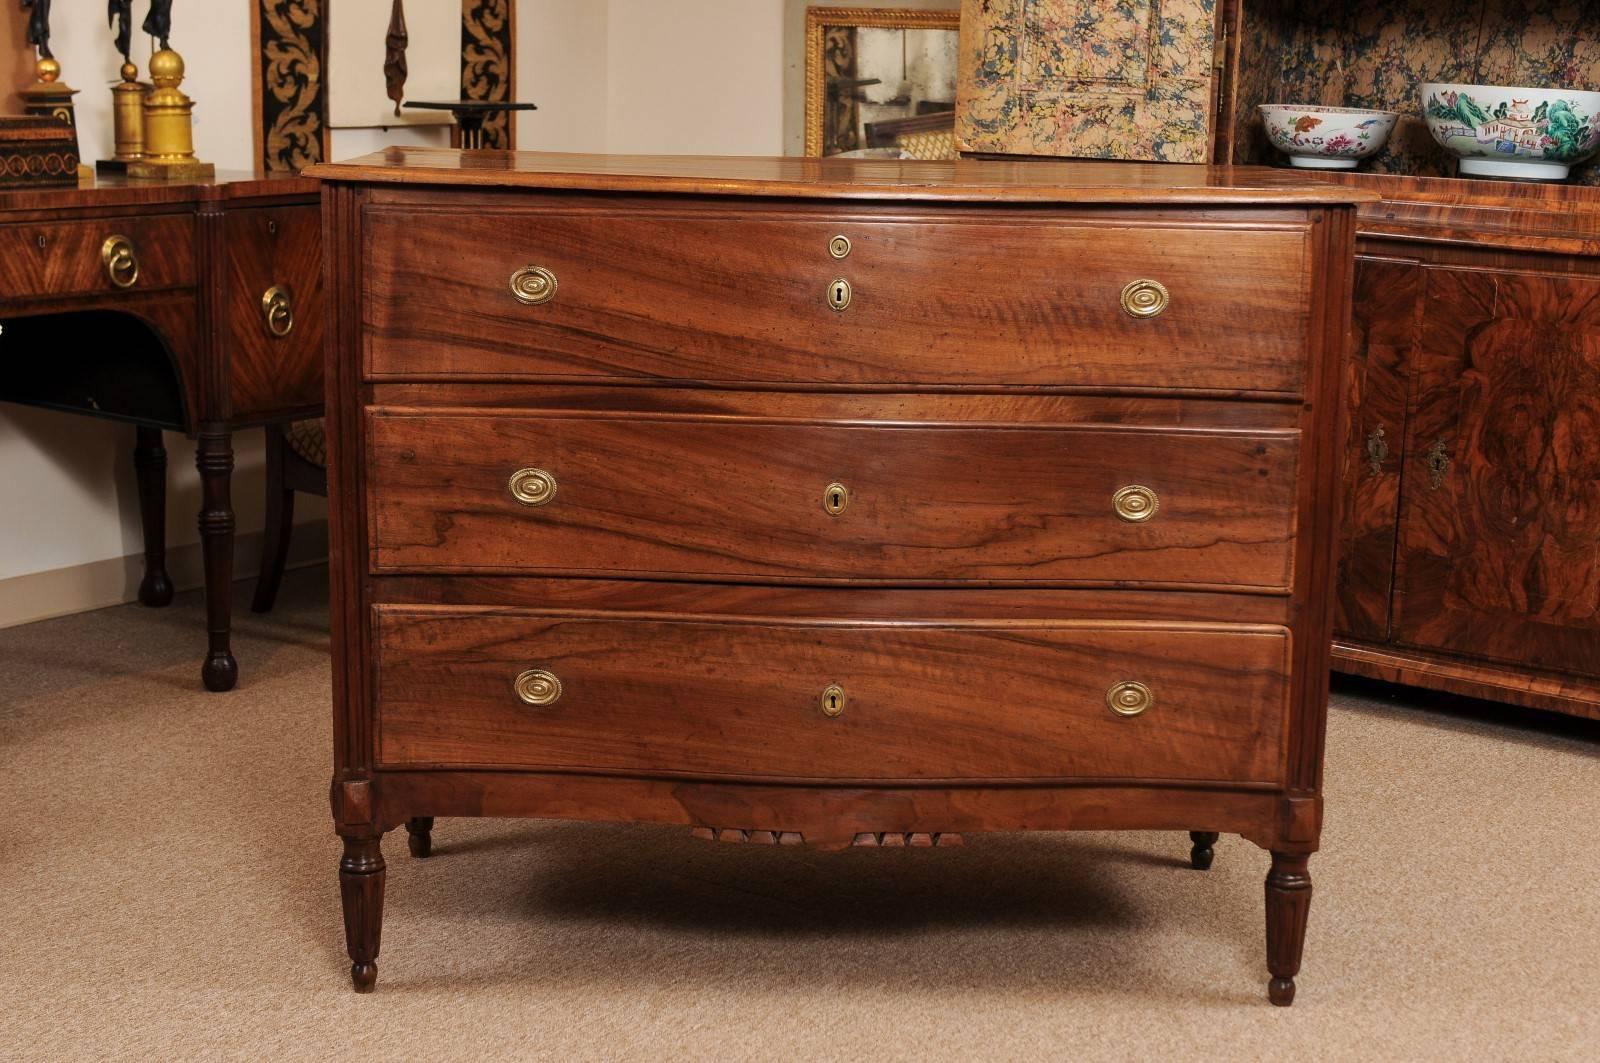 Late 18th century neoclassical walnut commode with serpentine front, three drawers, brass hardware, carved apron fluted legs.

William Word Fine Antiques, Atlanta's source for antique interiors since 1956.